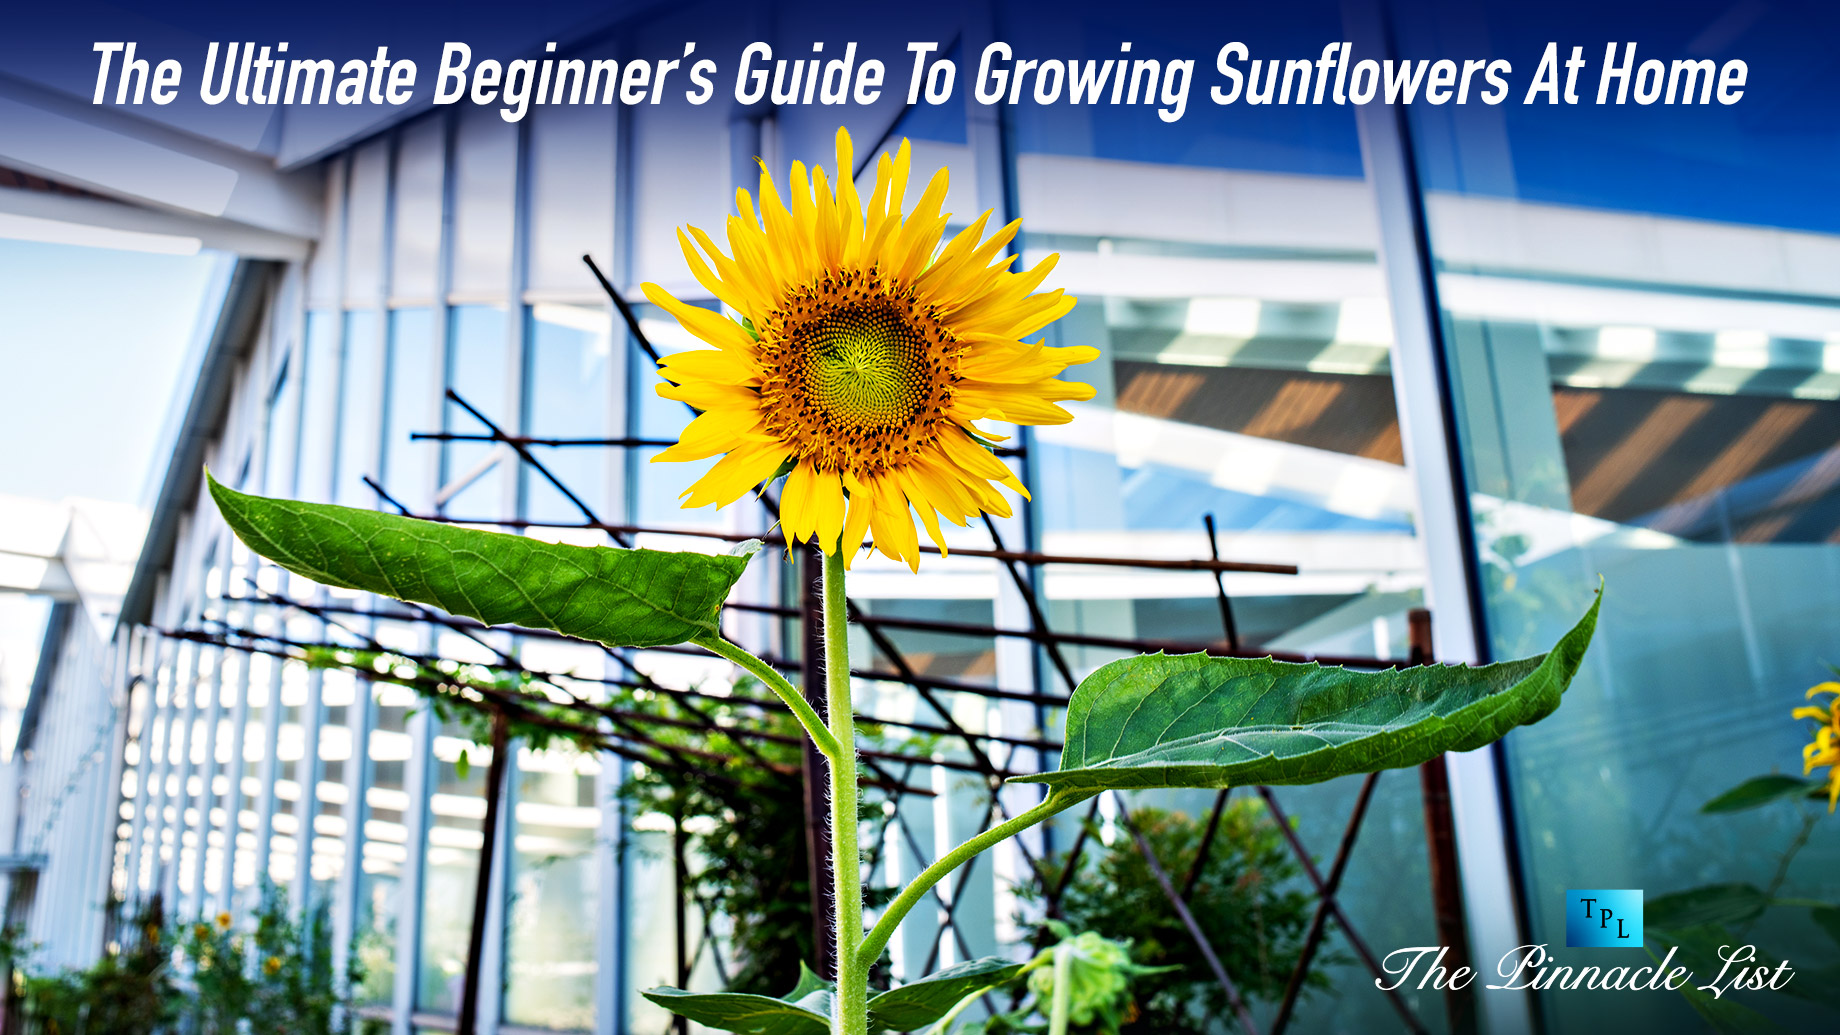 The Ultimate Beginner’s Guide To Growing Sunflowers At Home